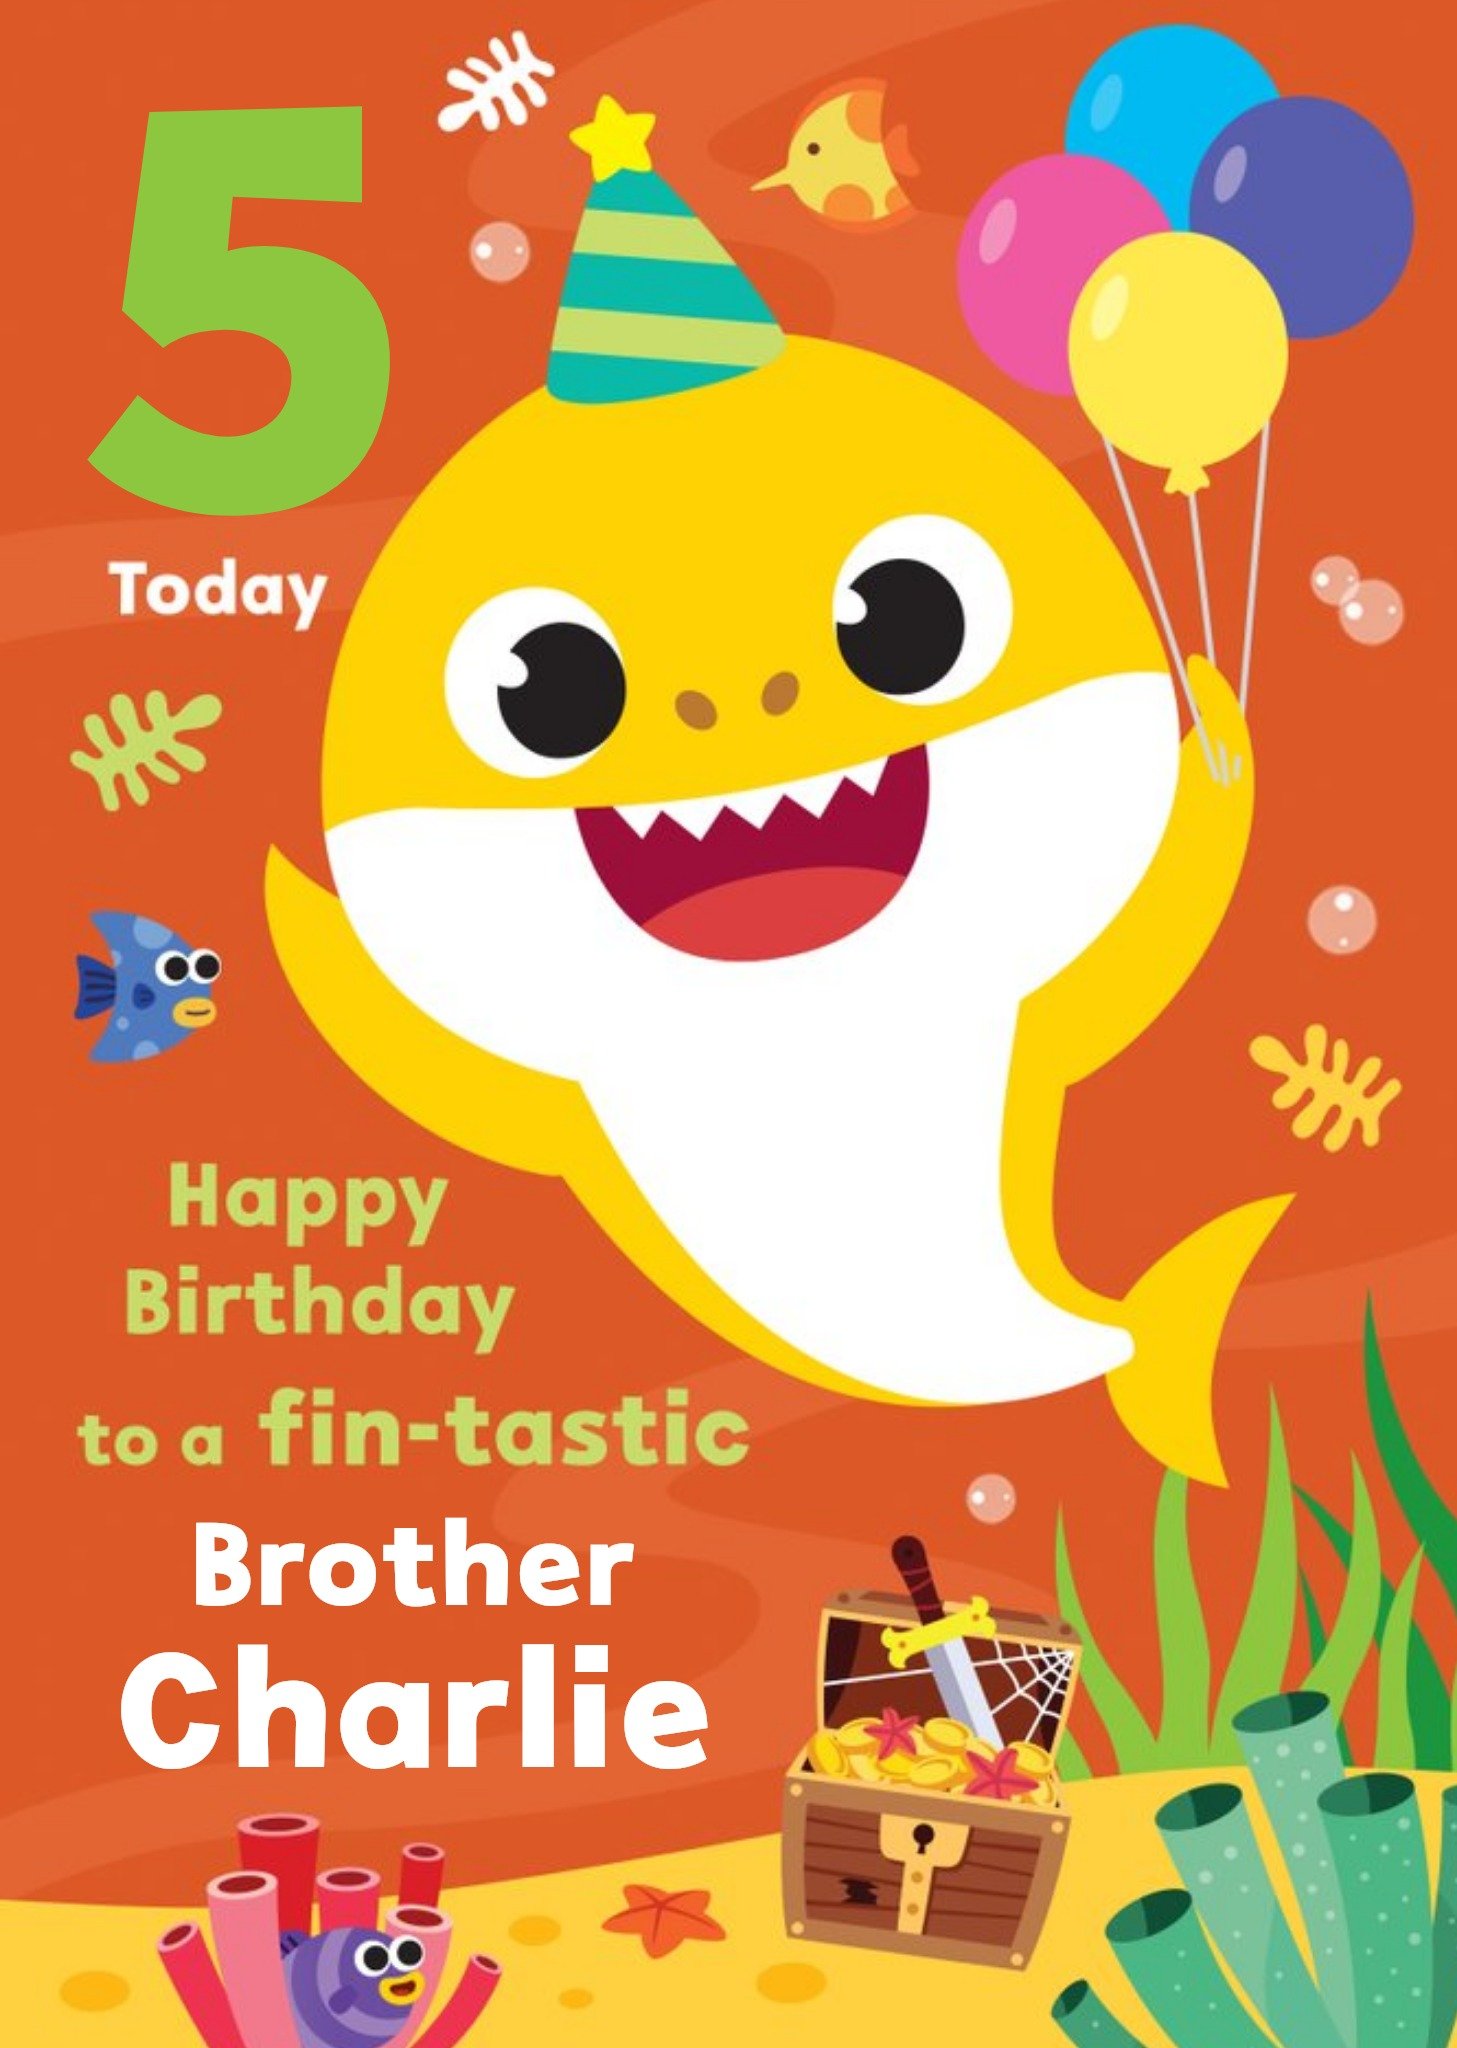 Baby Shark Song Kids 5 Today Fin-Tastic Brother Birthday Card, Large